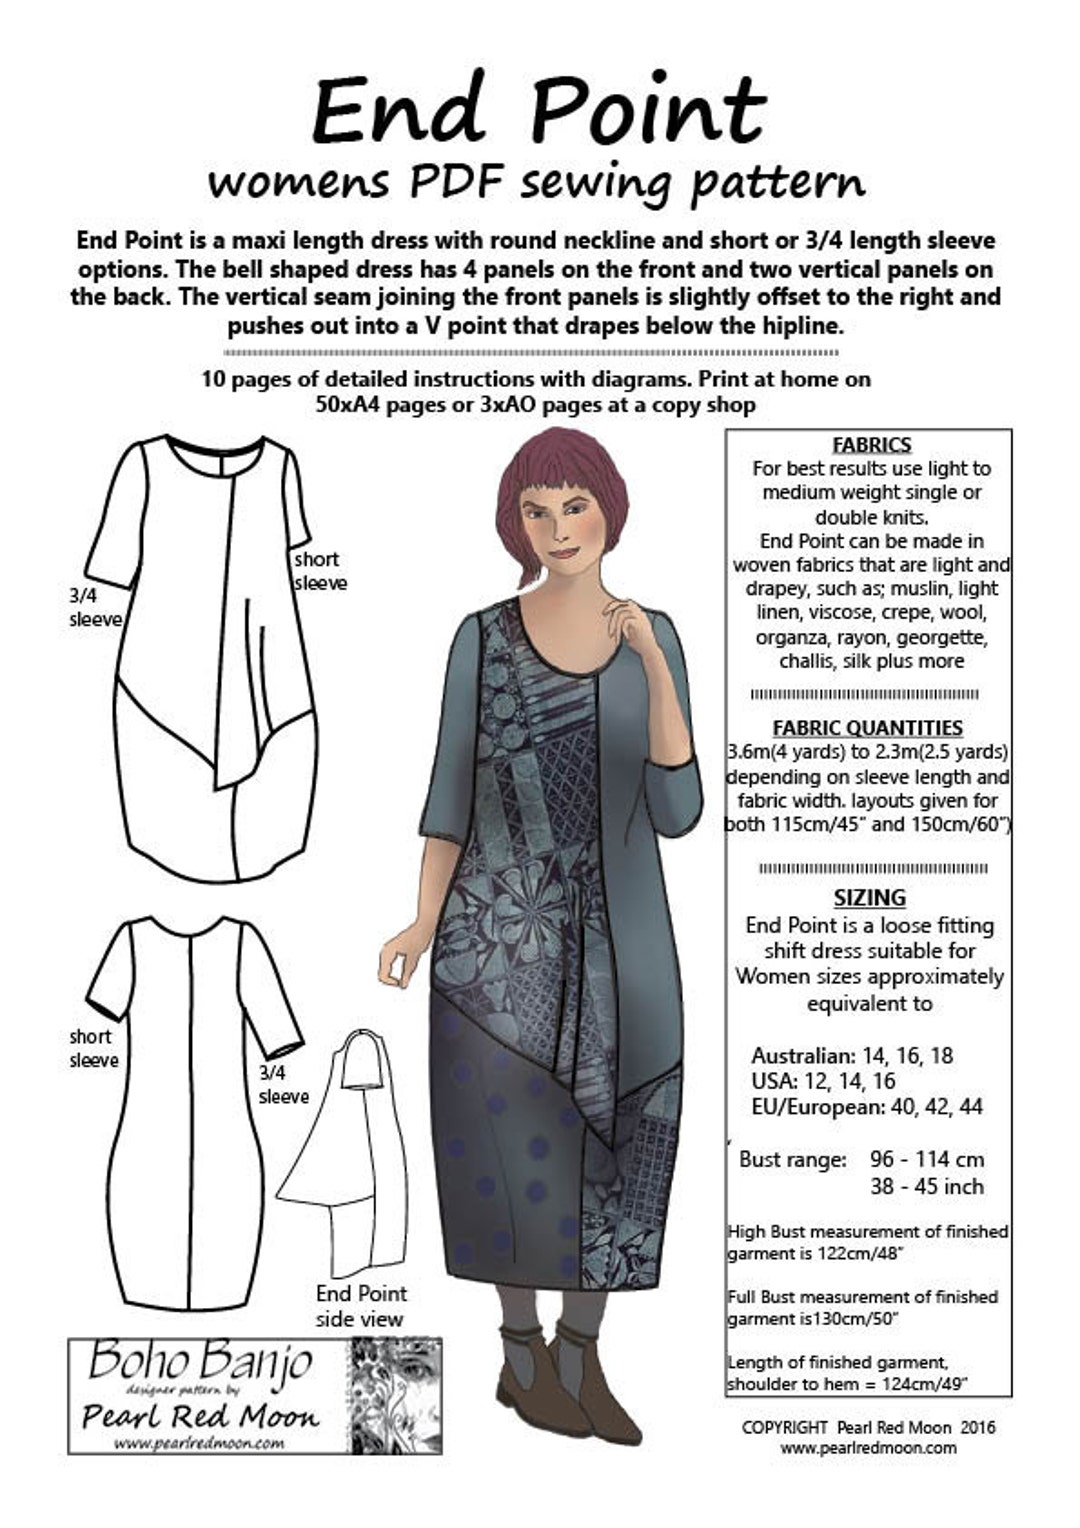 End Point, Womens PDF Sewing Pattern - Etsy